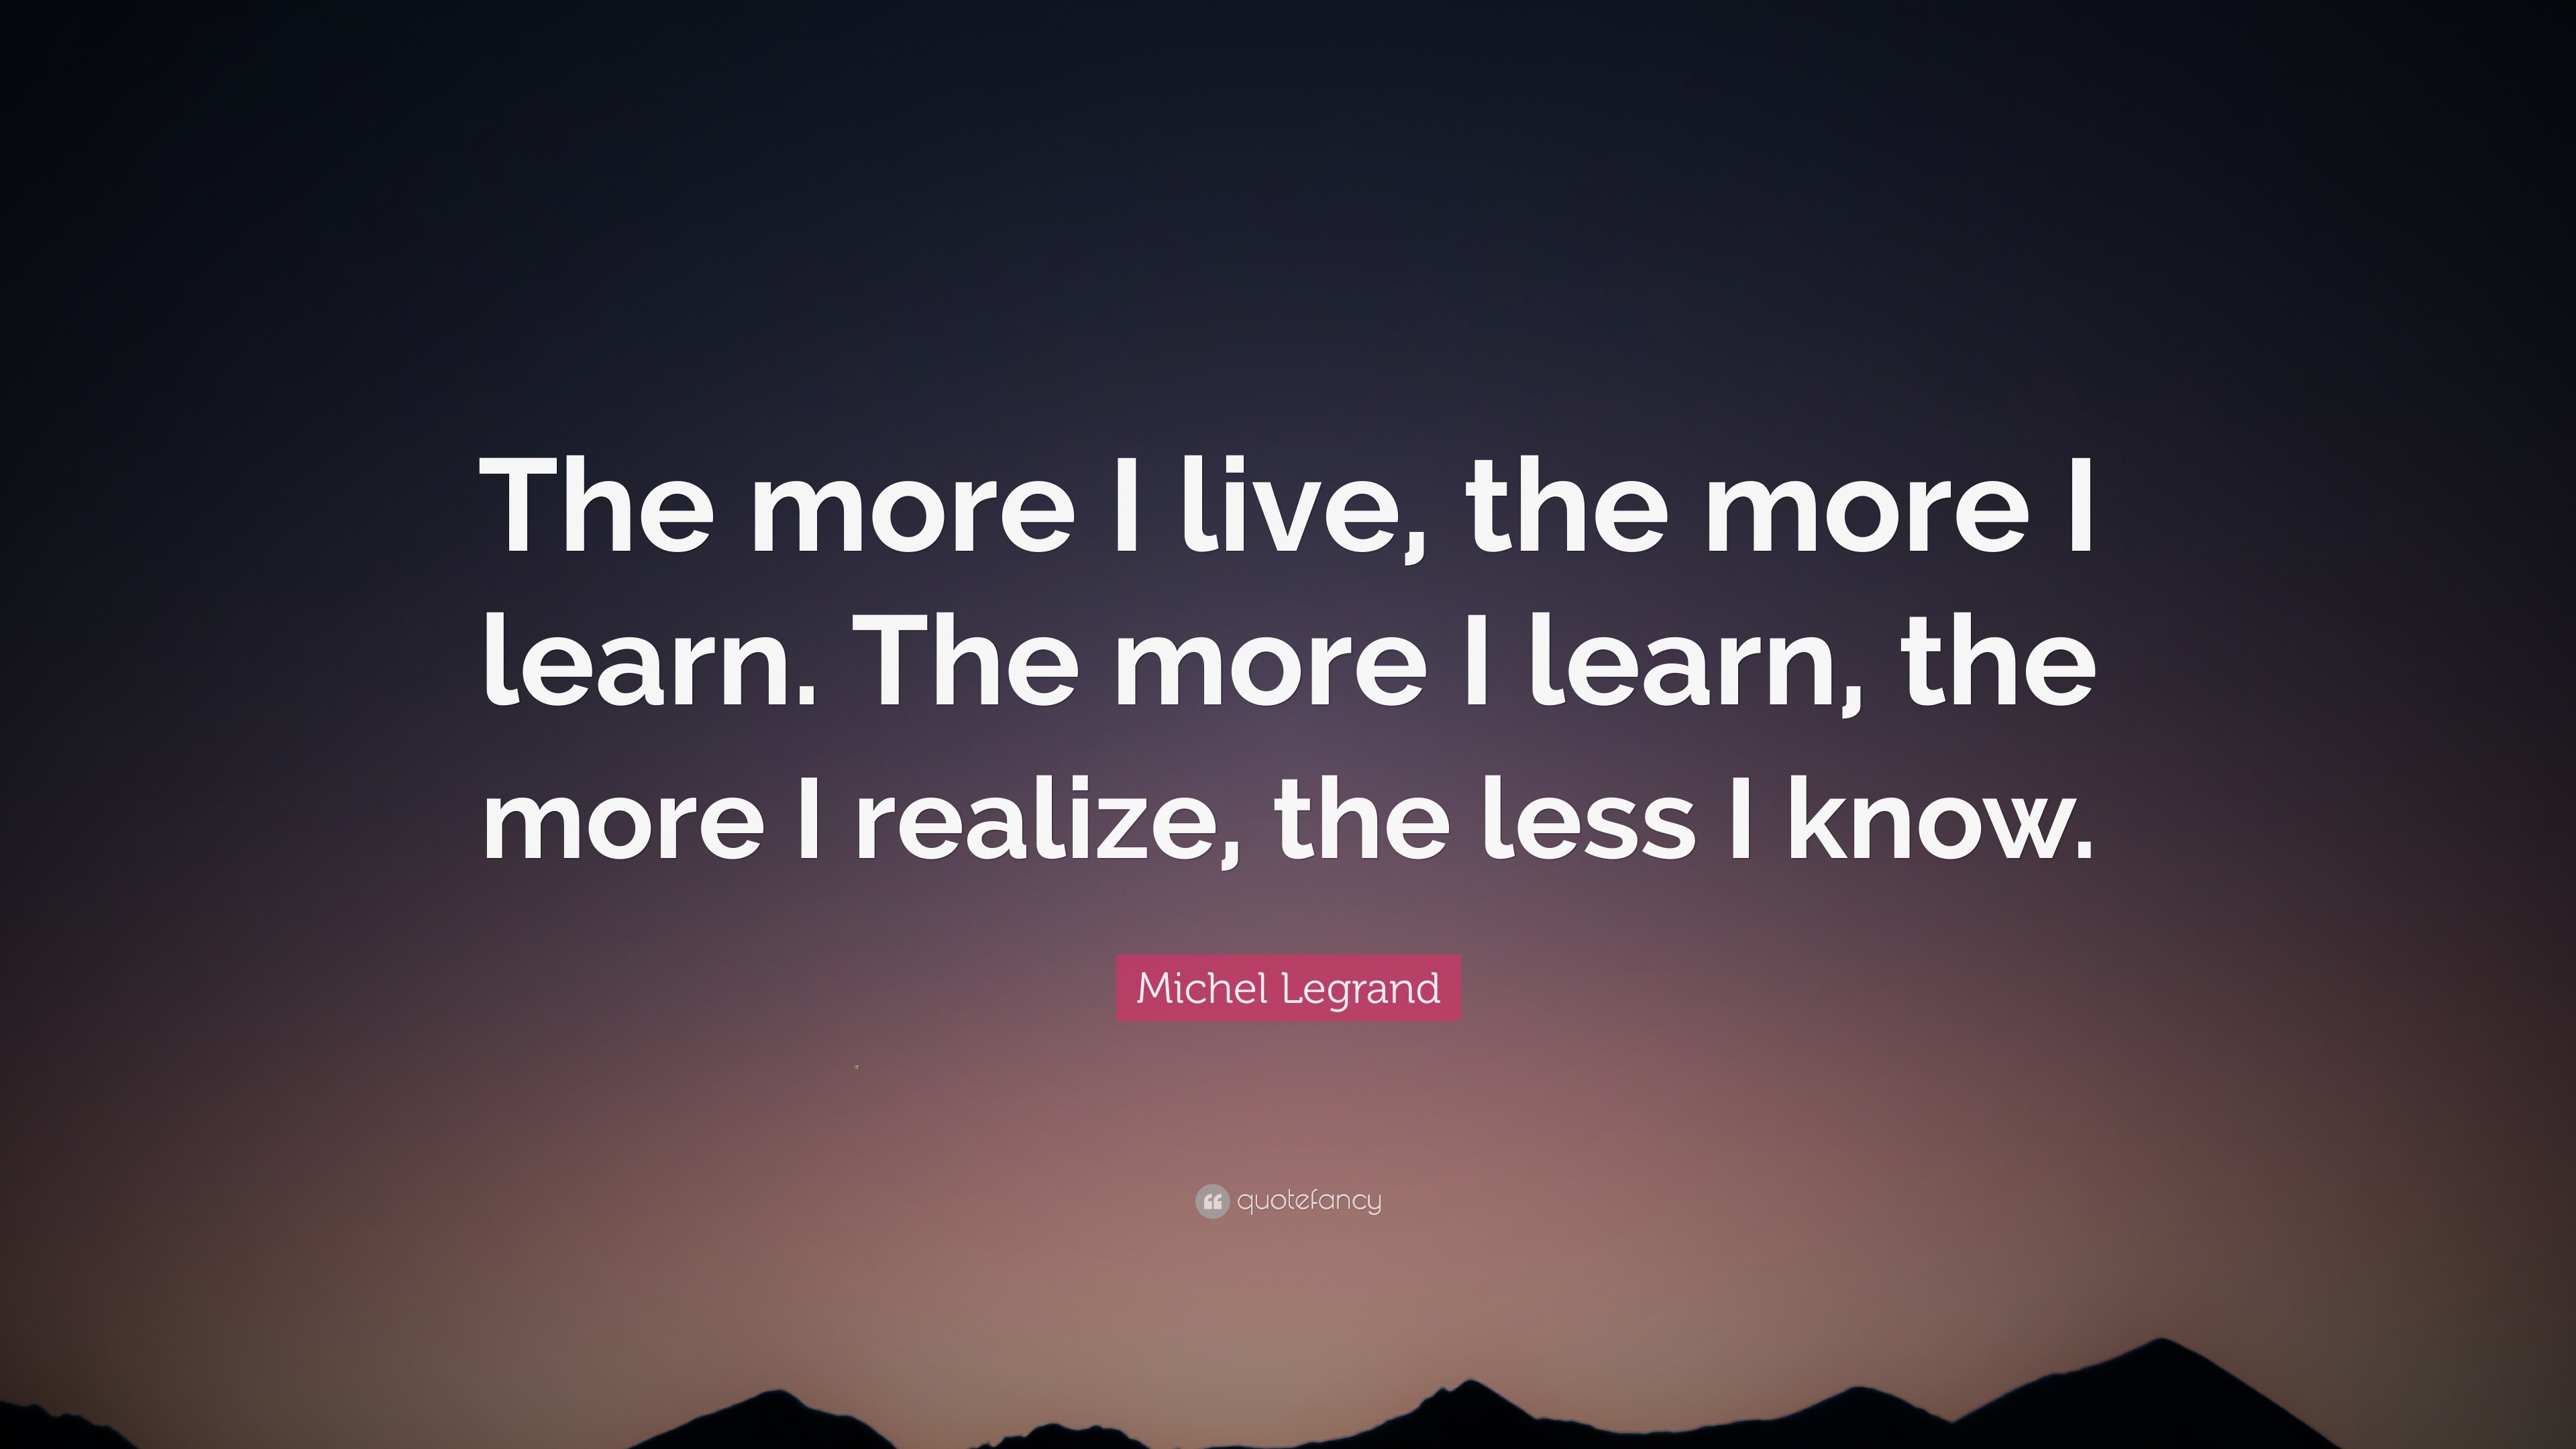 Michel Legrand Quote: “The more I live, the more I learn. The more I ...